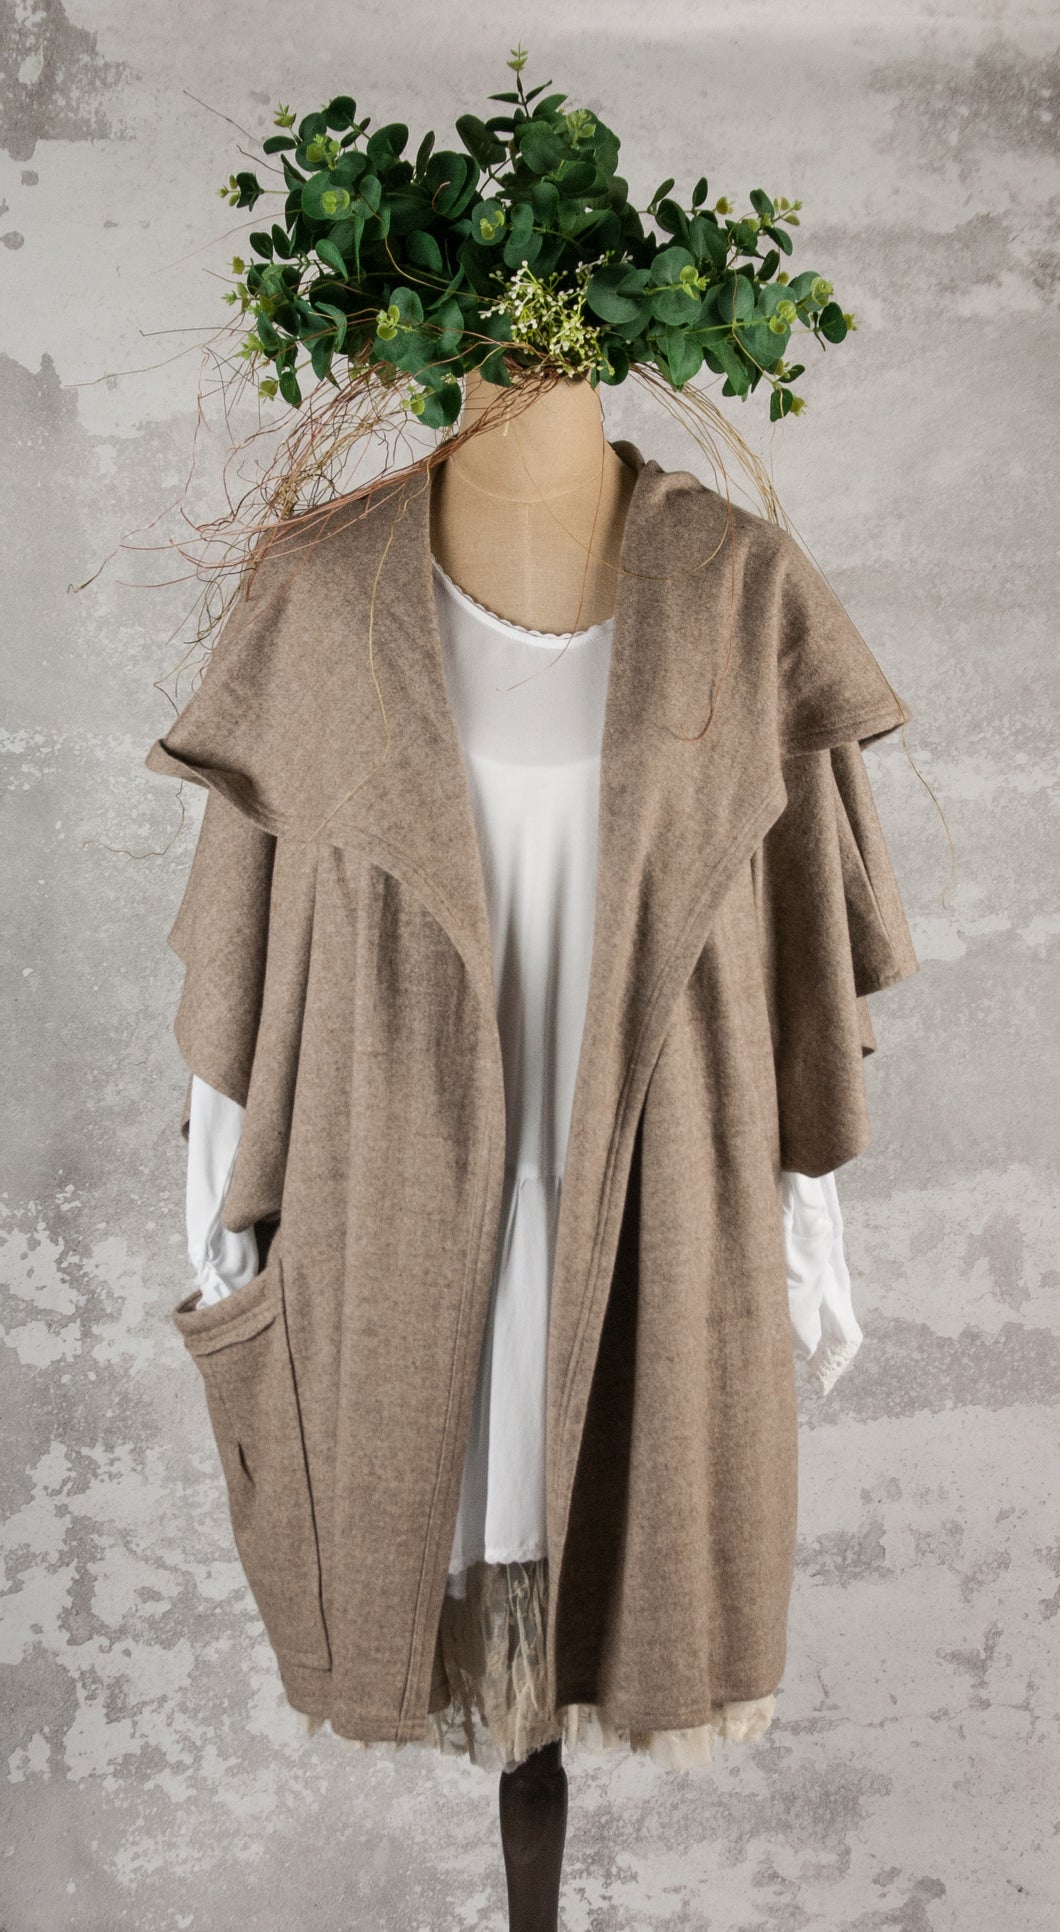 Hooded poncho over jacket